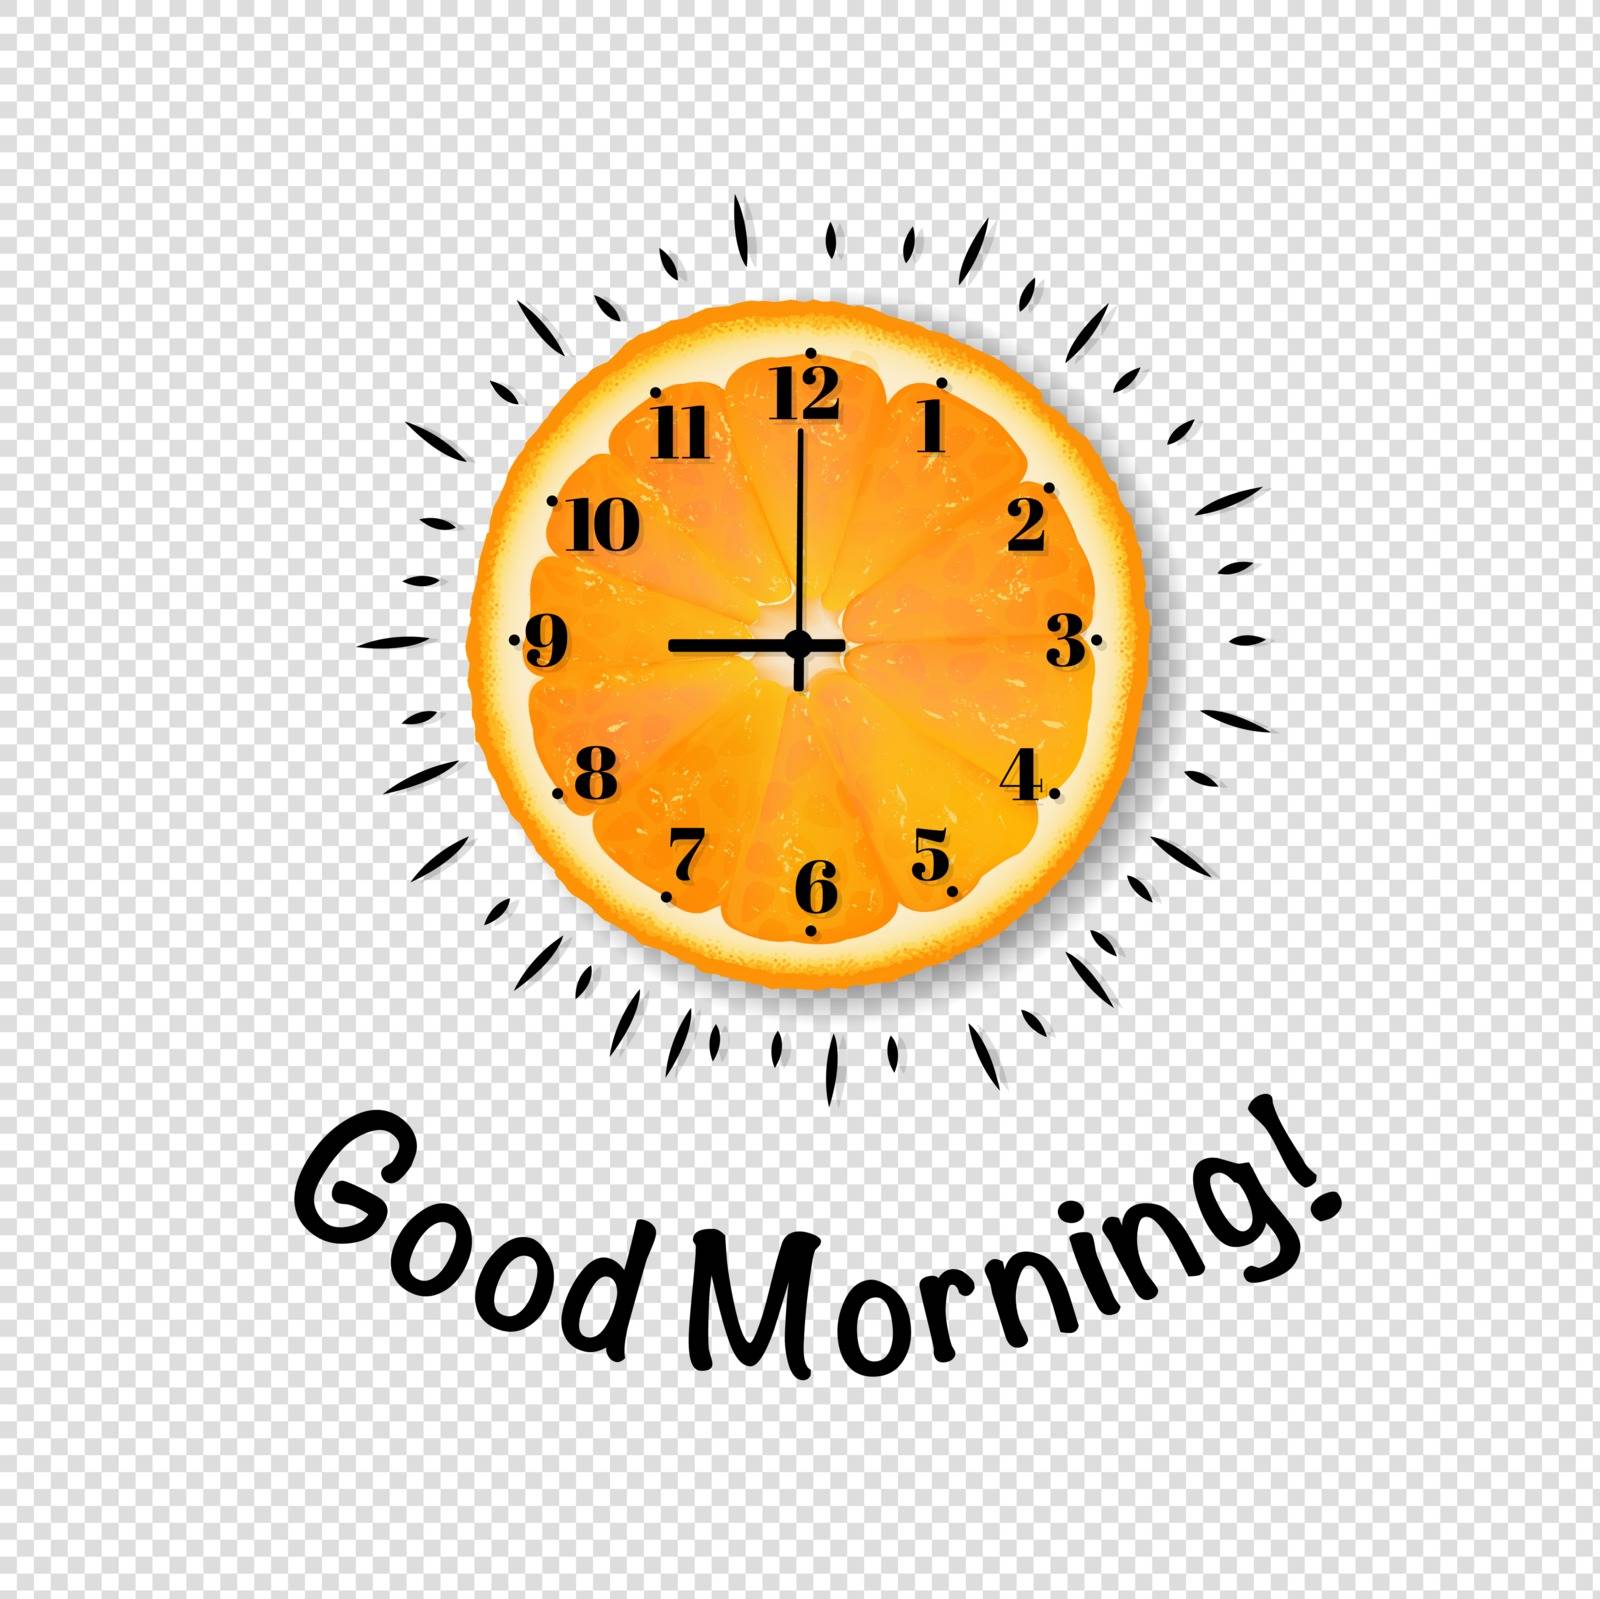 Good Morning Banner With Orange Transparent Background by cammep